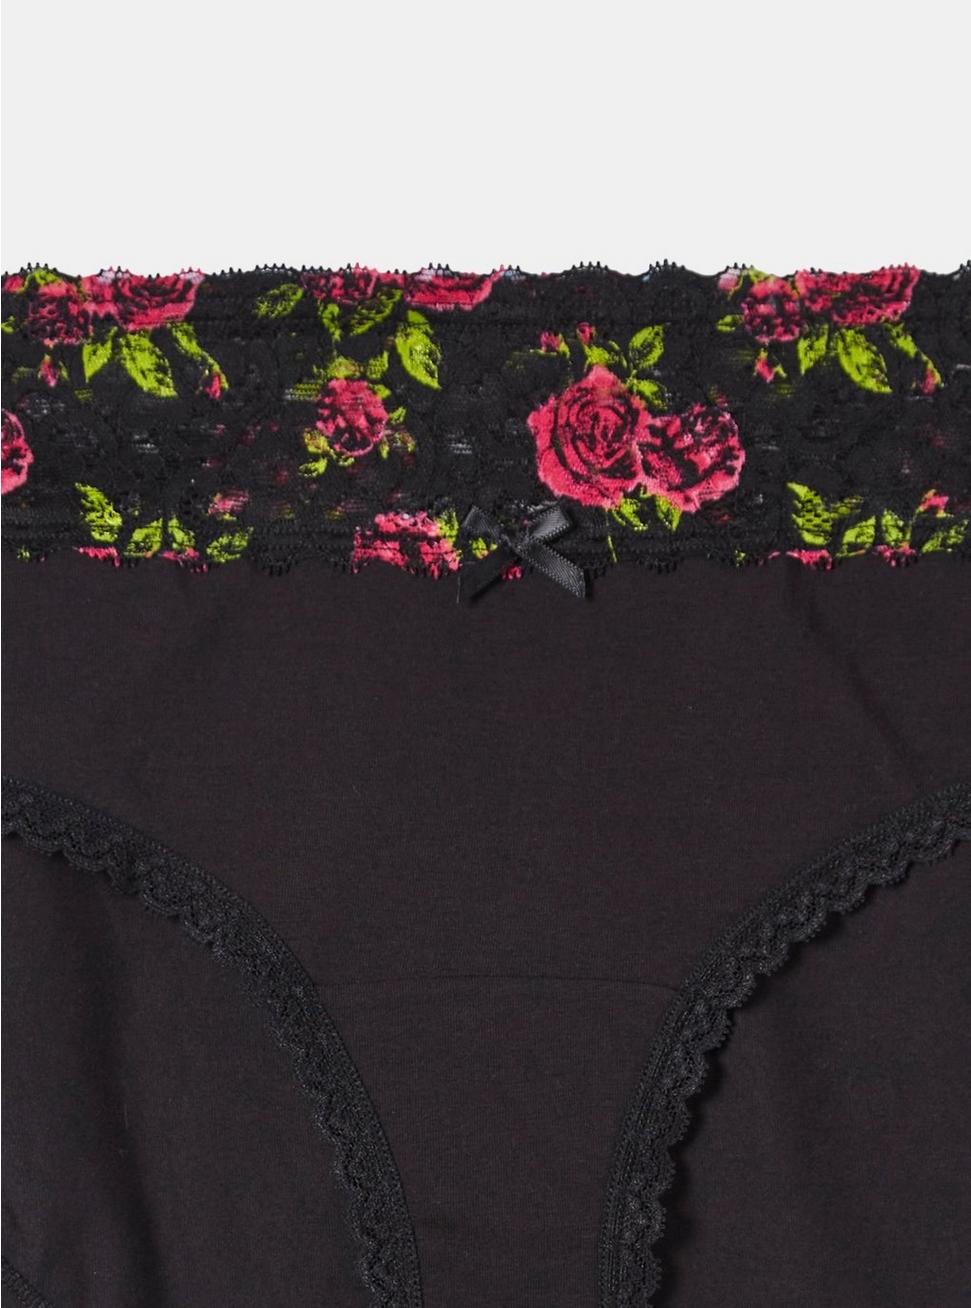 Cotton Mid Rise Hipster Lace Panty, RICH BLACK BRUSHED ROSES FLORAL, alternate